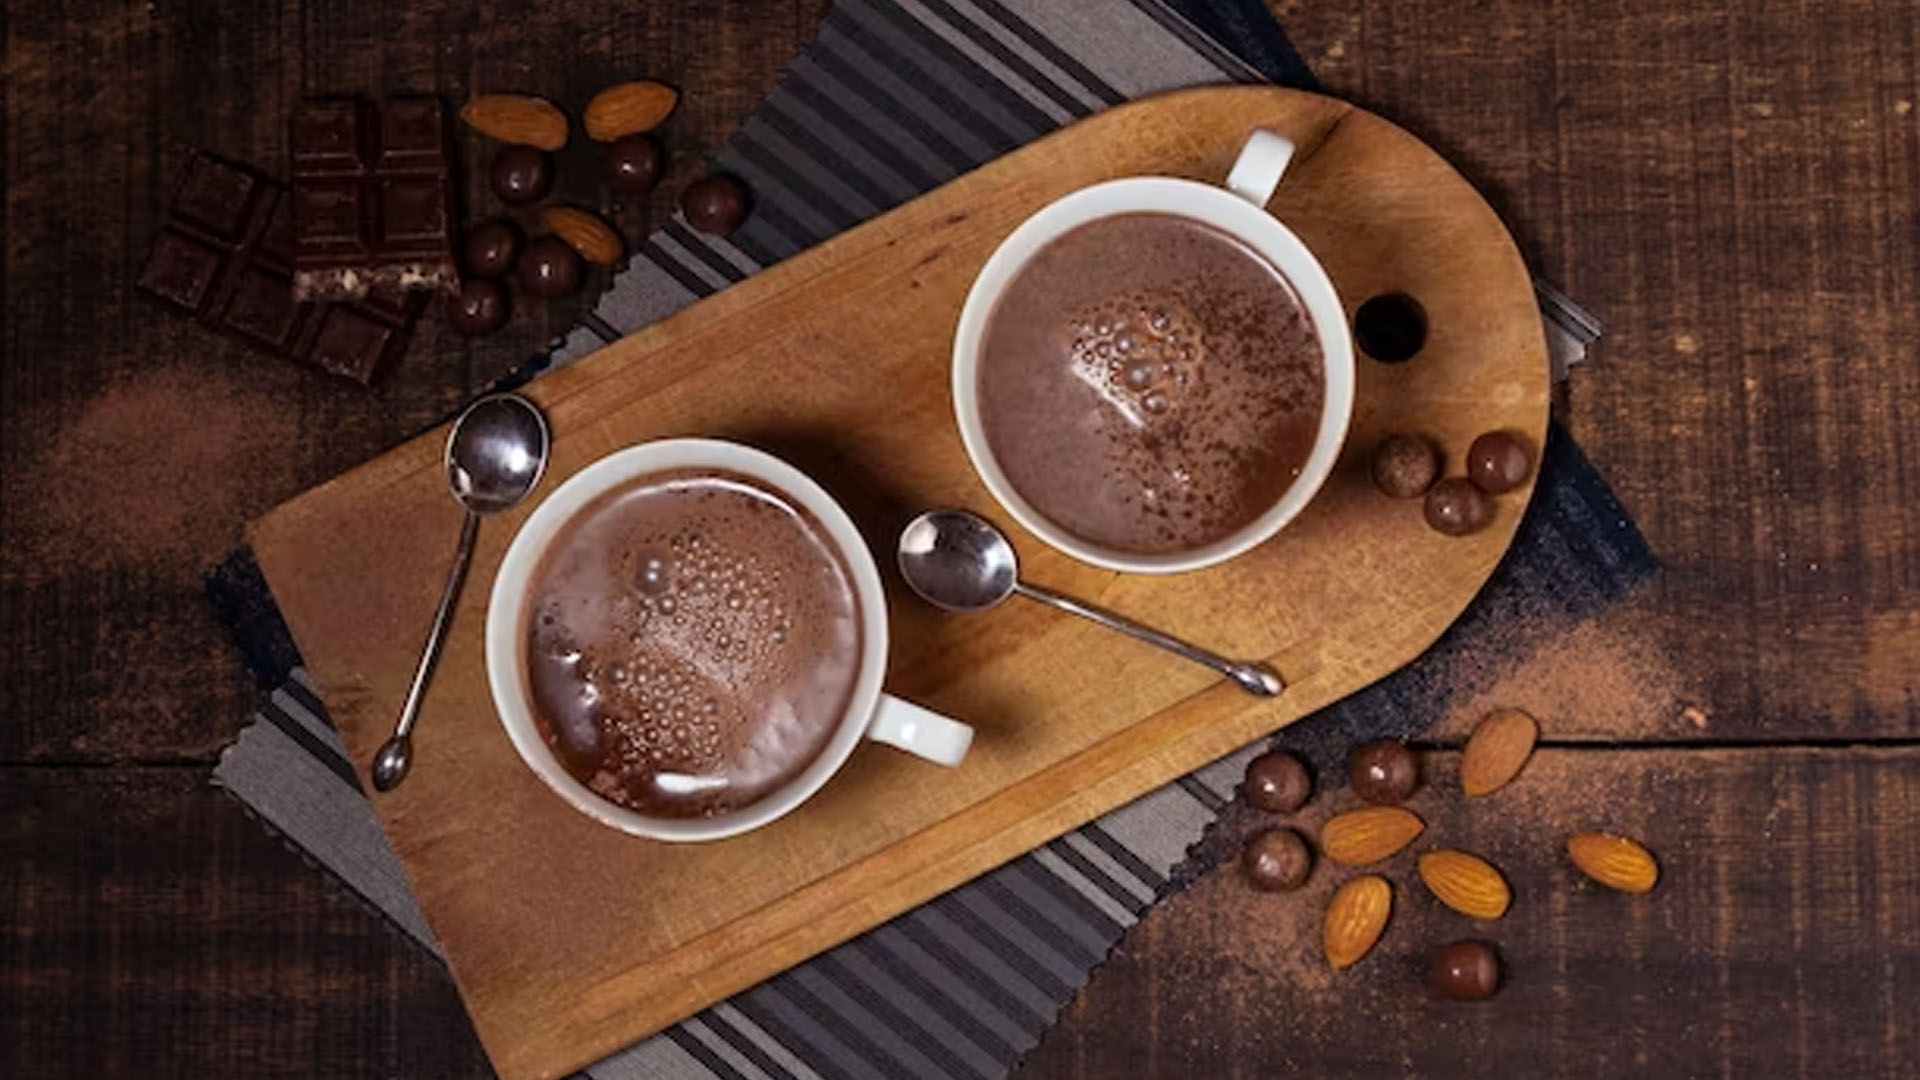 What Are The Health Benefits of Hot Chocolate?